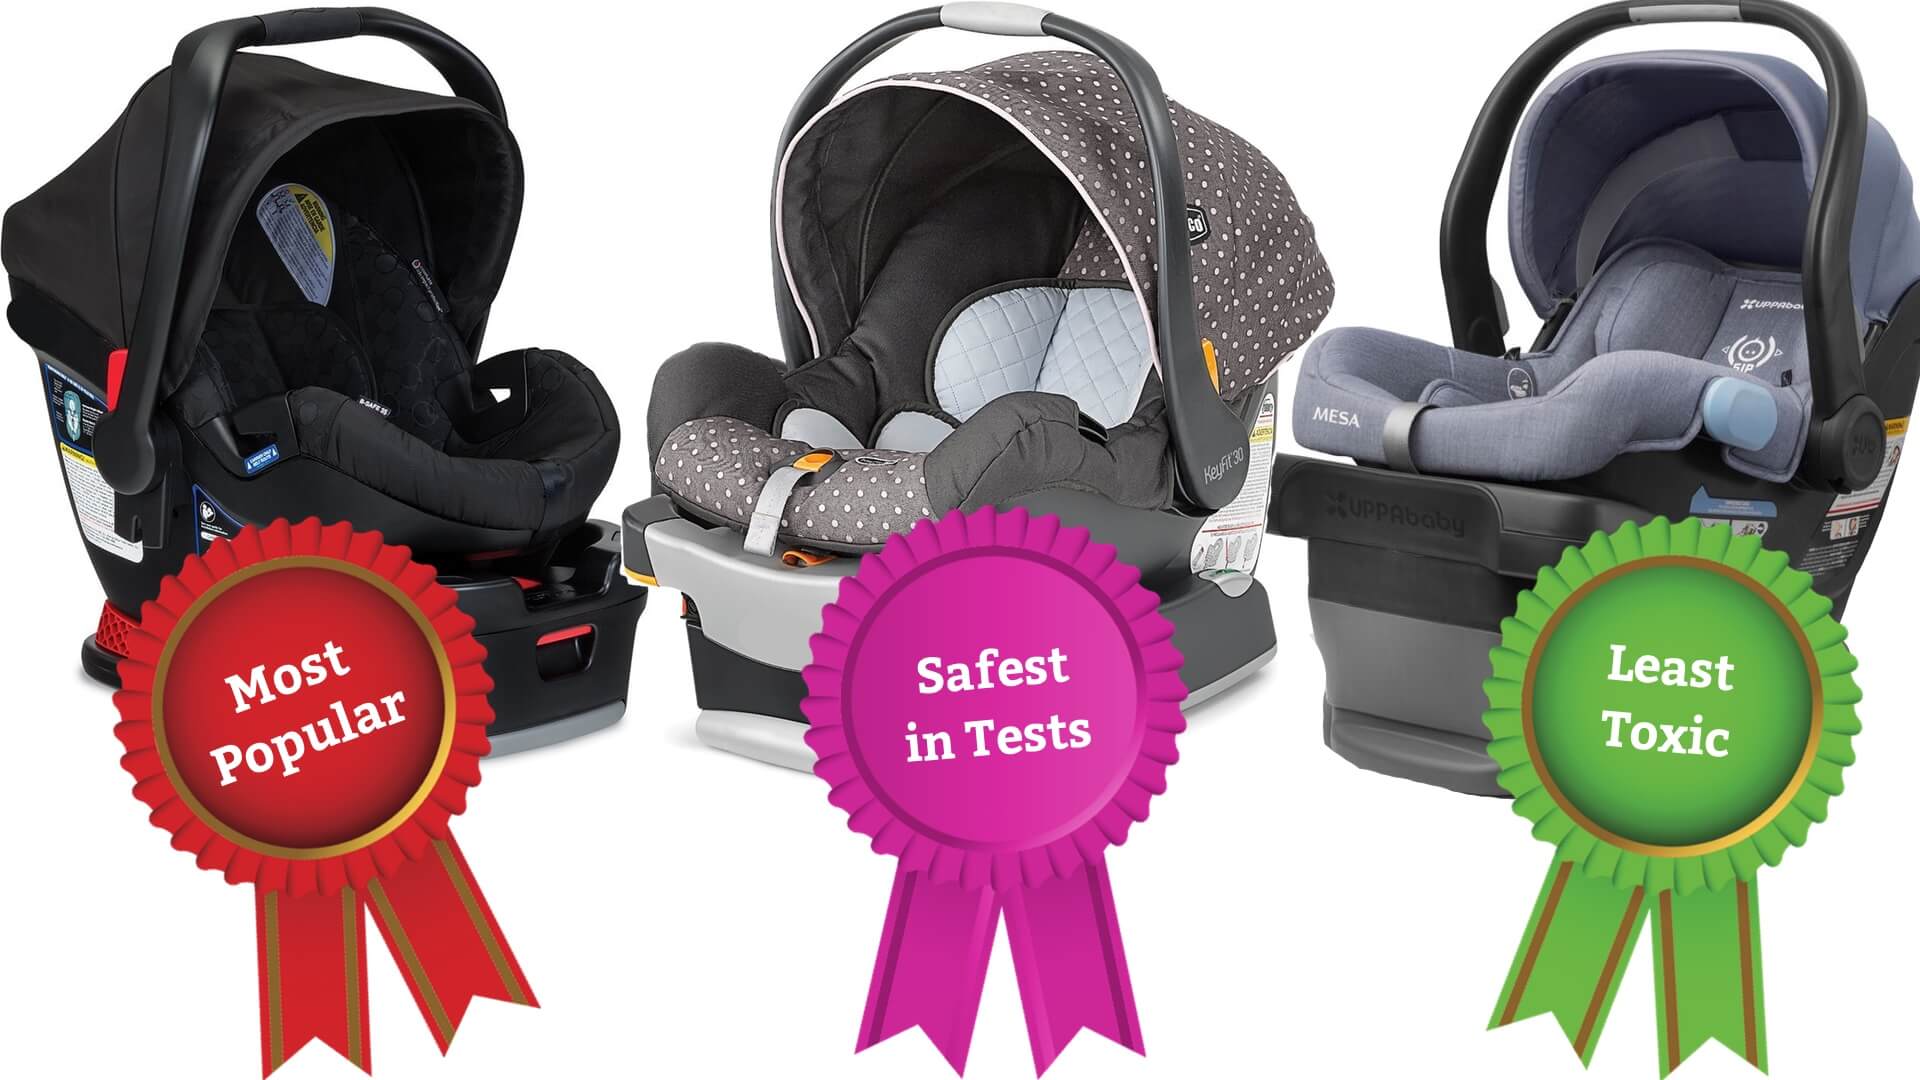 Best Infant Car Seat Safest Most, What Is The Safest Rated Infant Car Seat